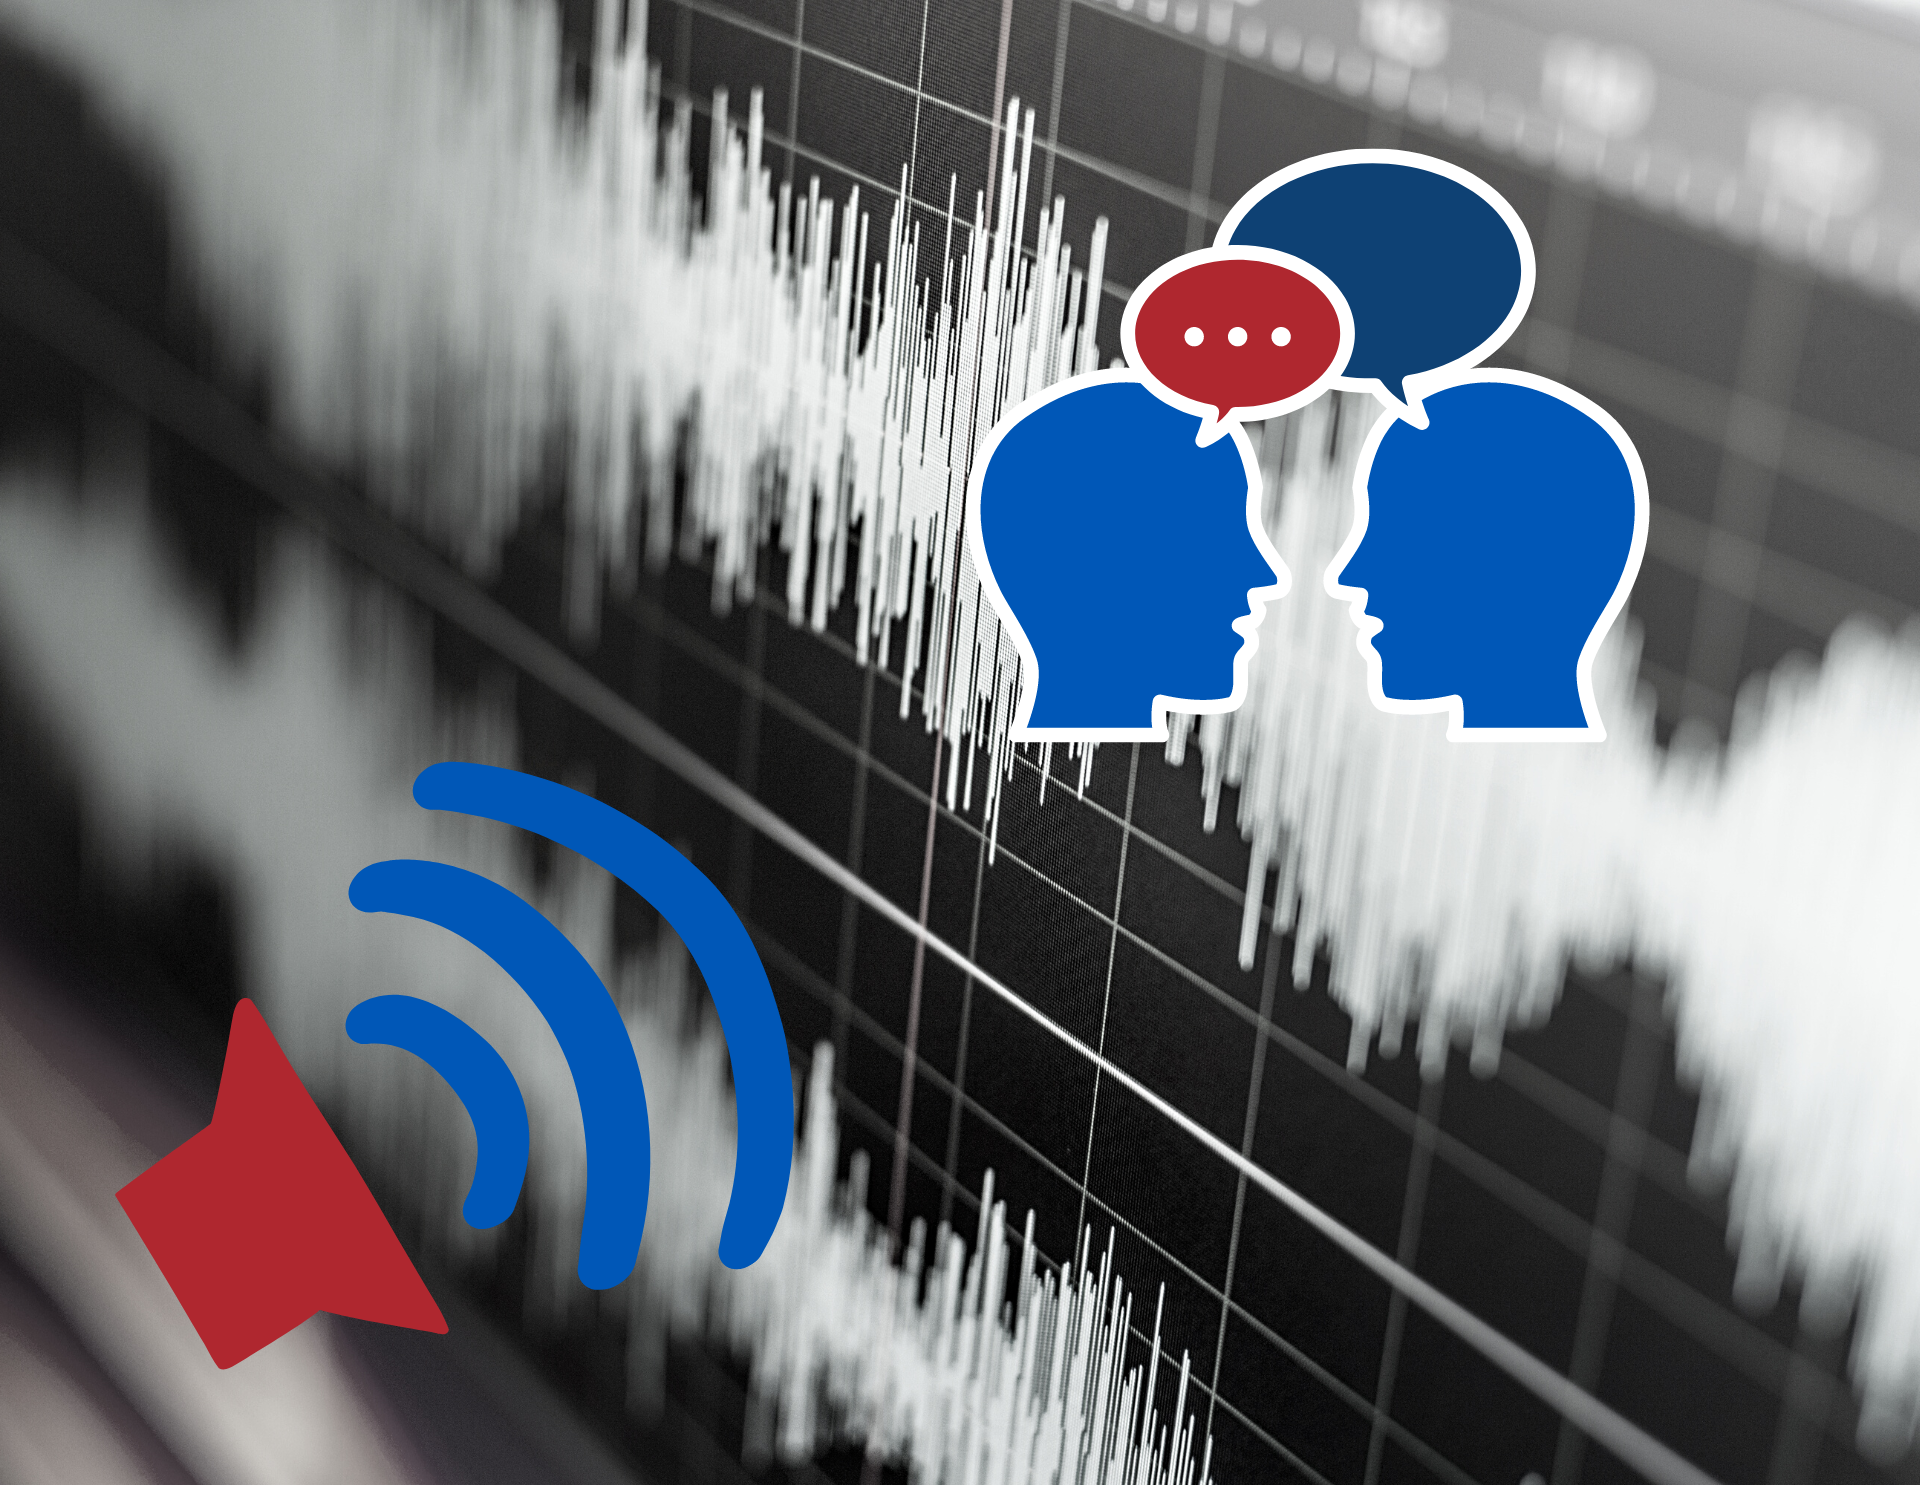 Background: black and white sound waves. Speech bubbles and microphone images in blue and red overlaid.